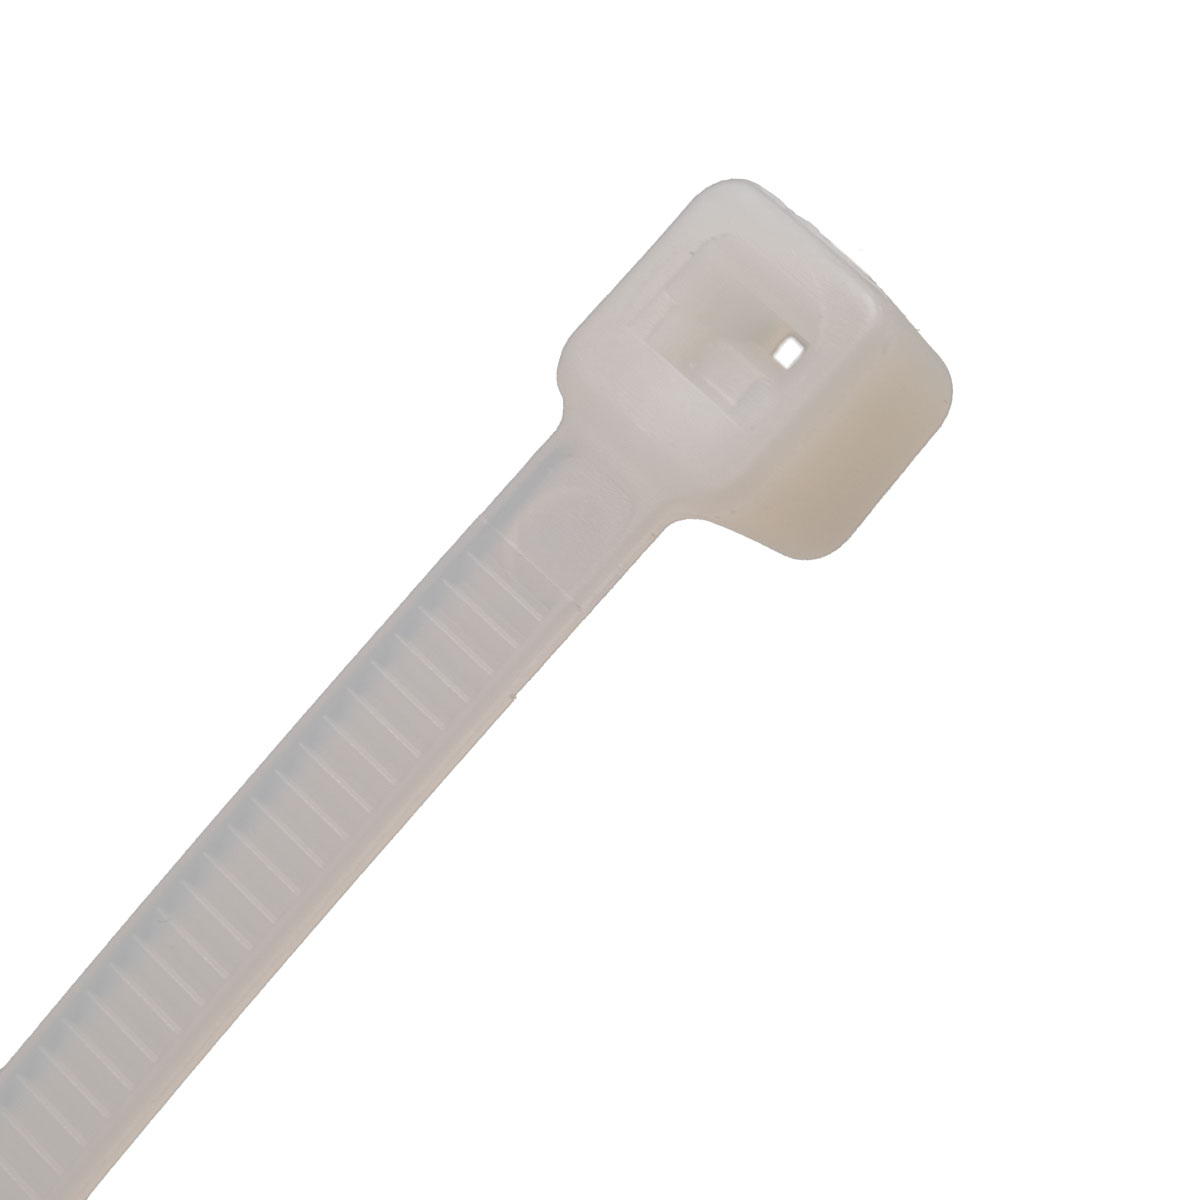 2.5x150mm Natural, Nylon 66 cable tie